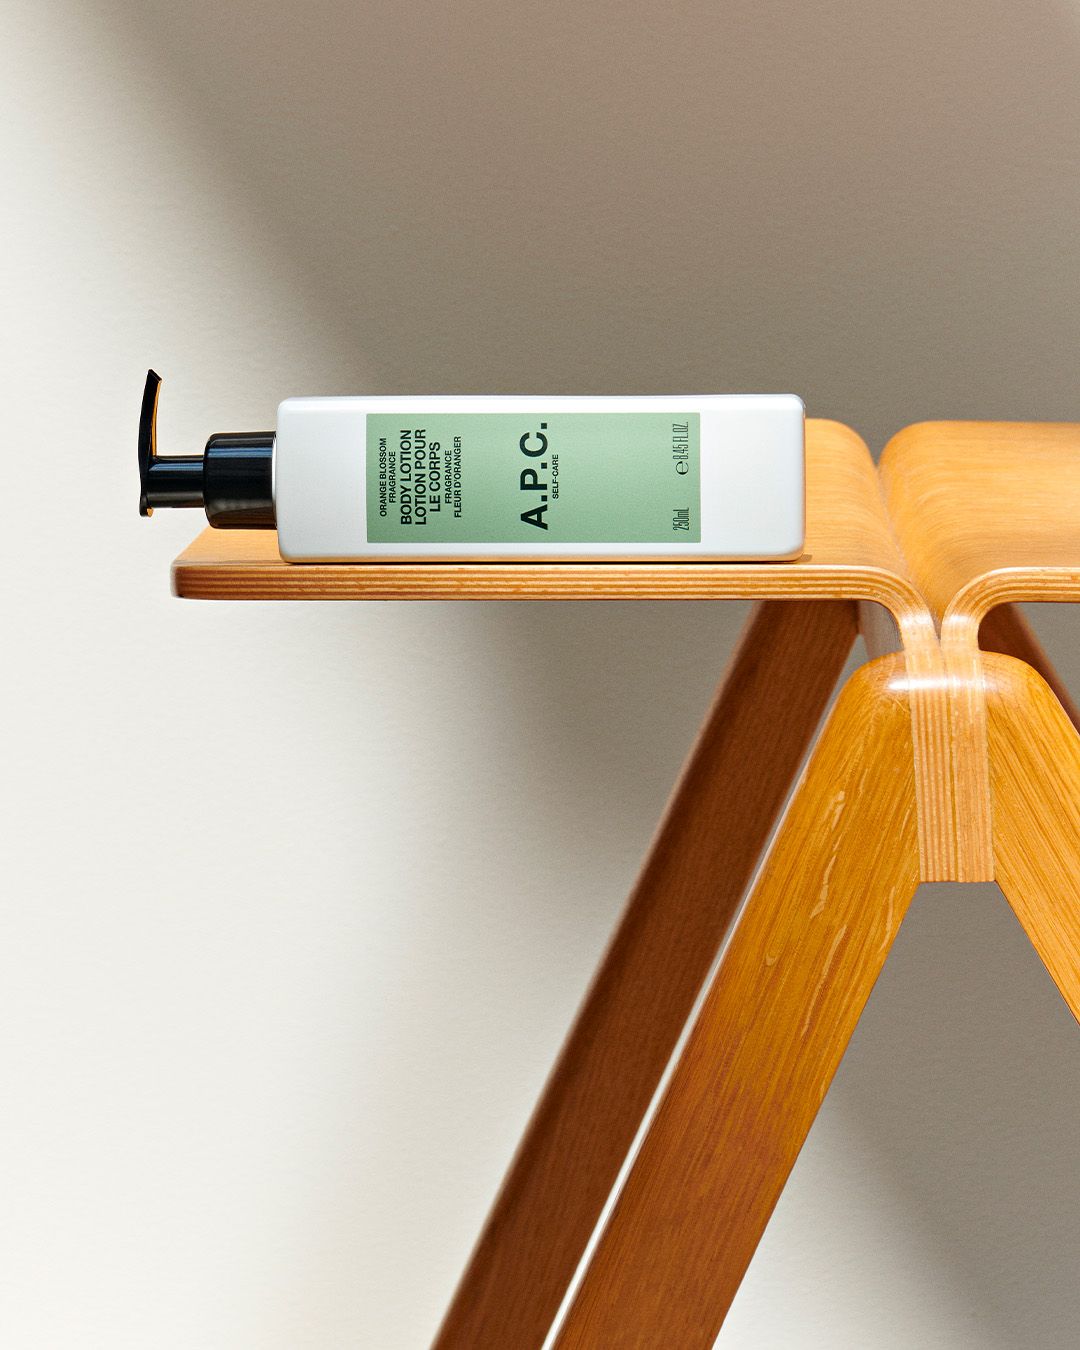 A.P.C. now makes self-care products, including body lotion and cologne